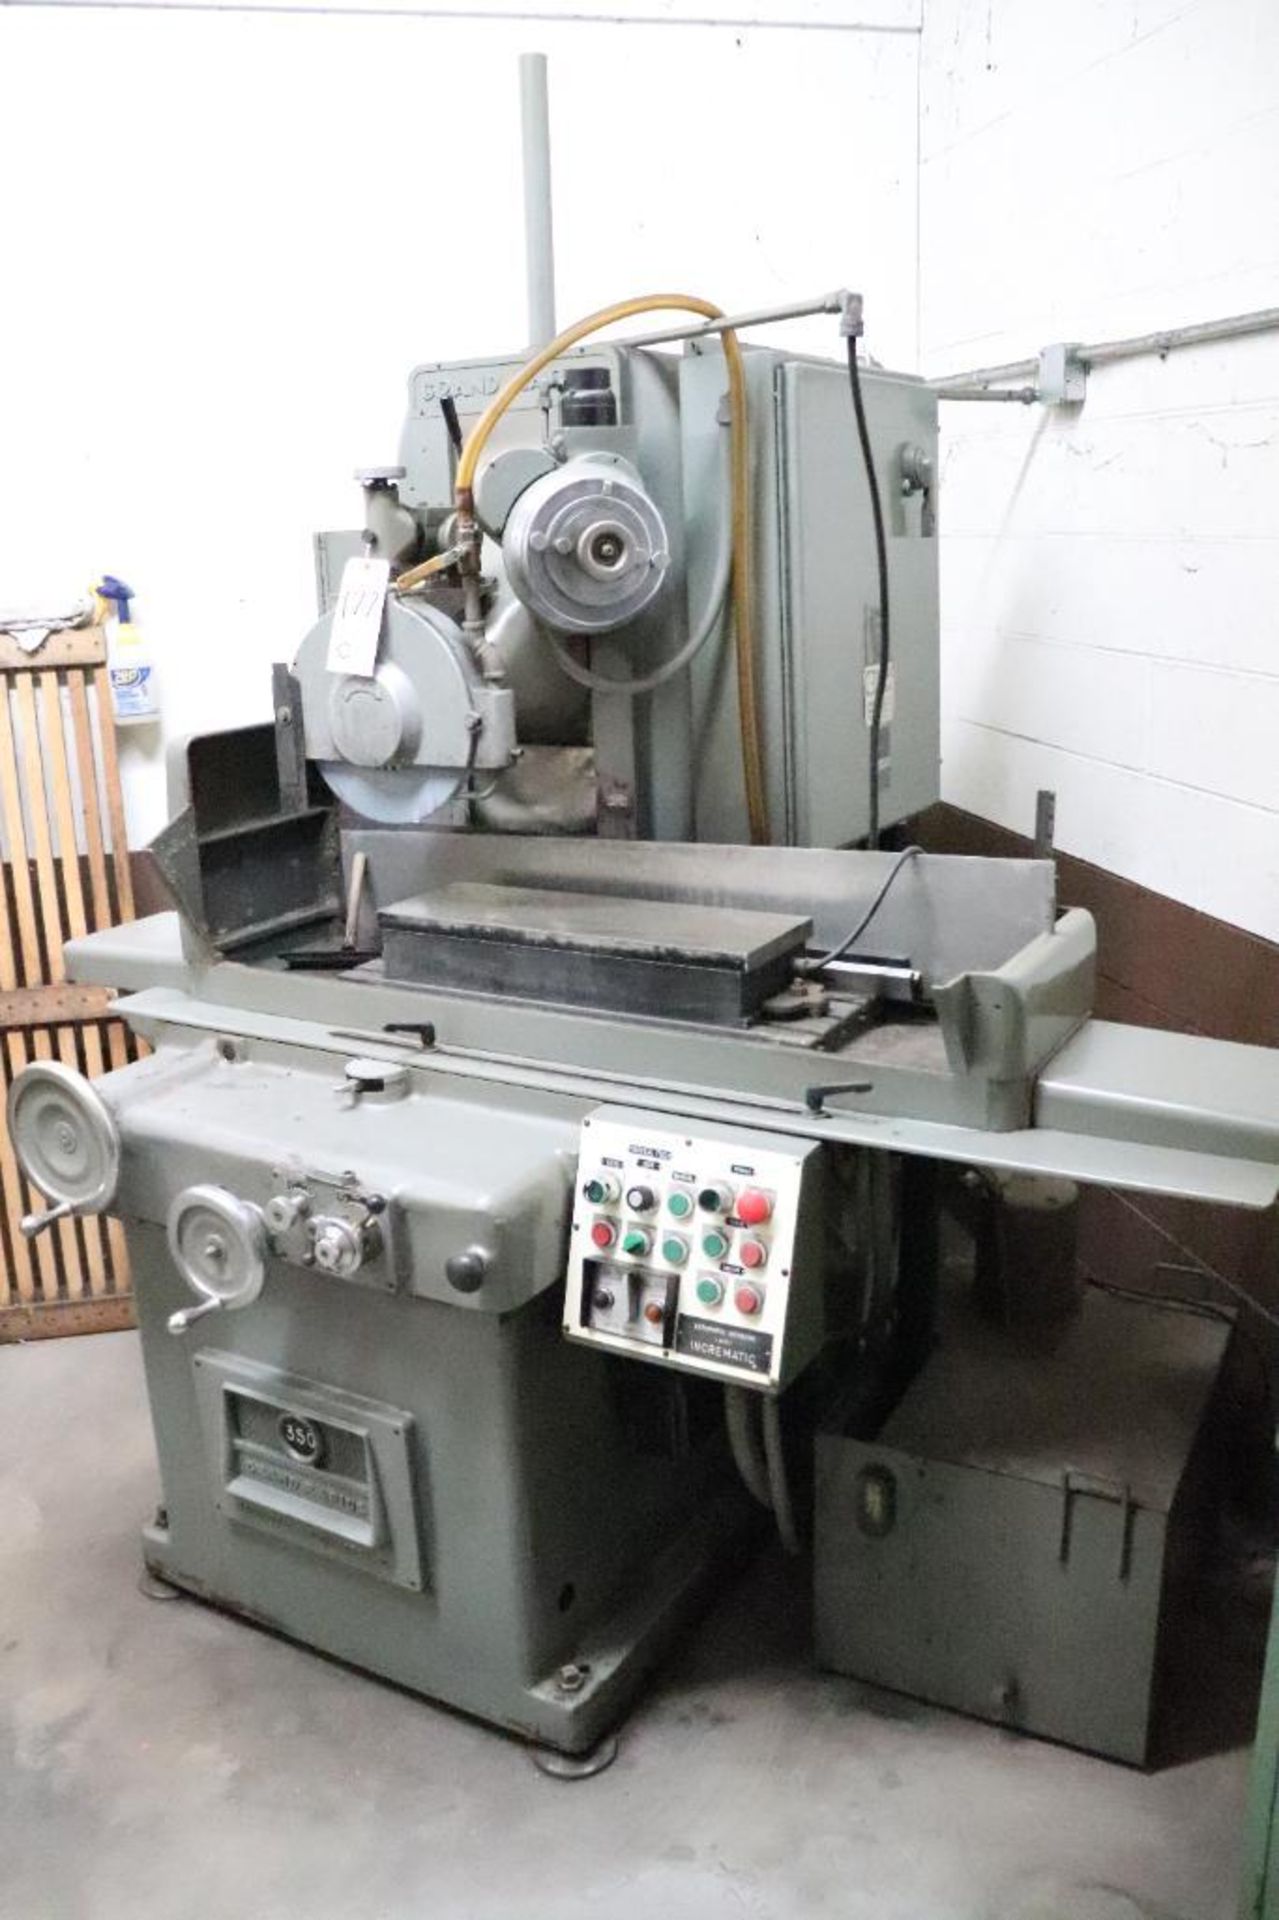 Grand Rapids No.350 8" x 24" automatic surface grinder